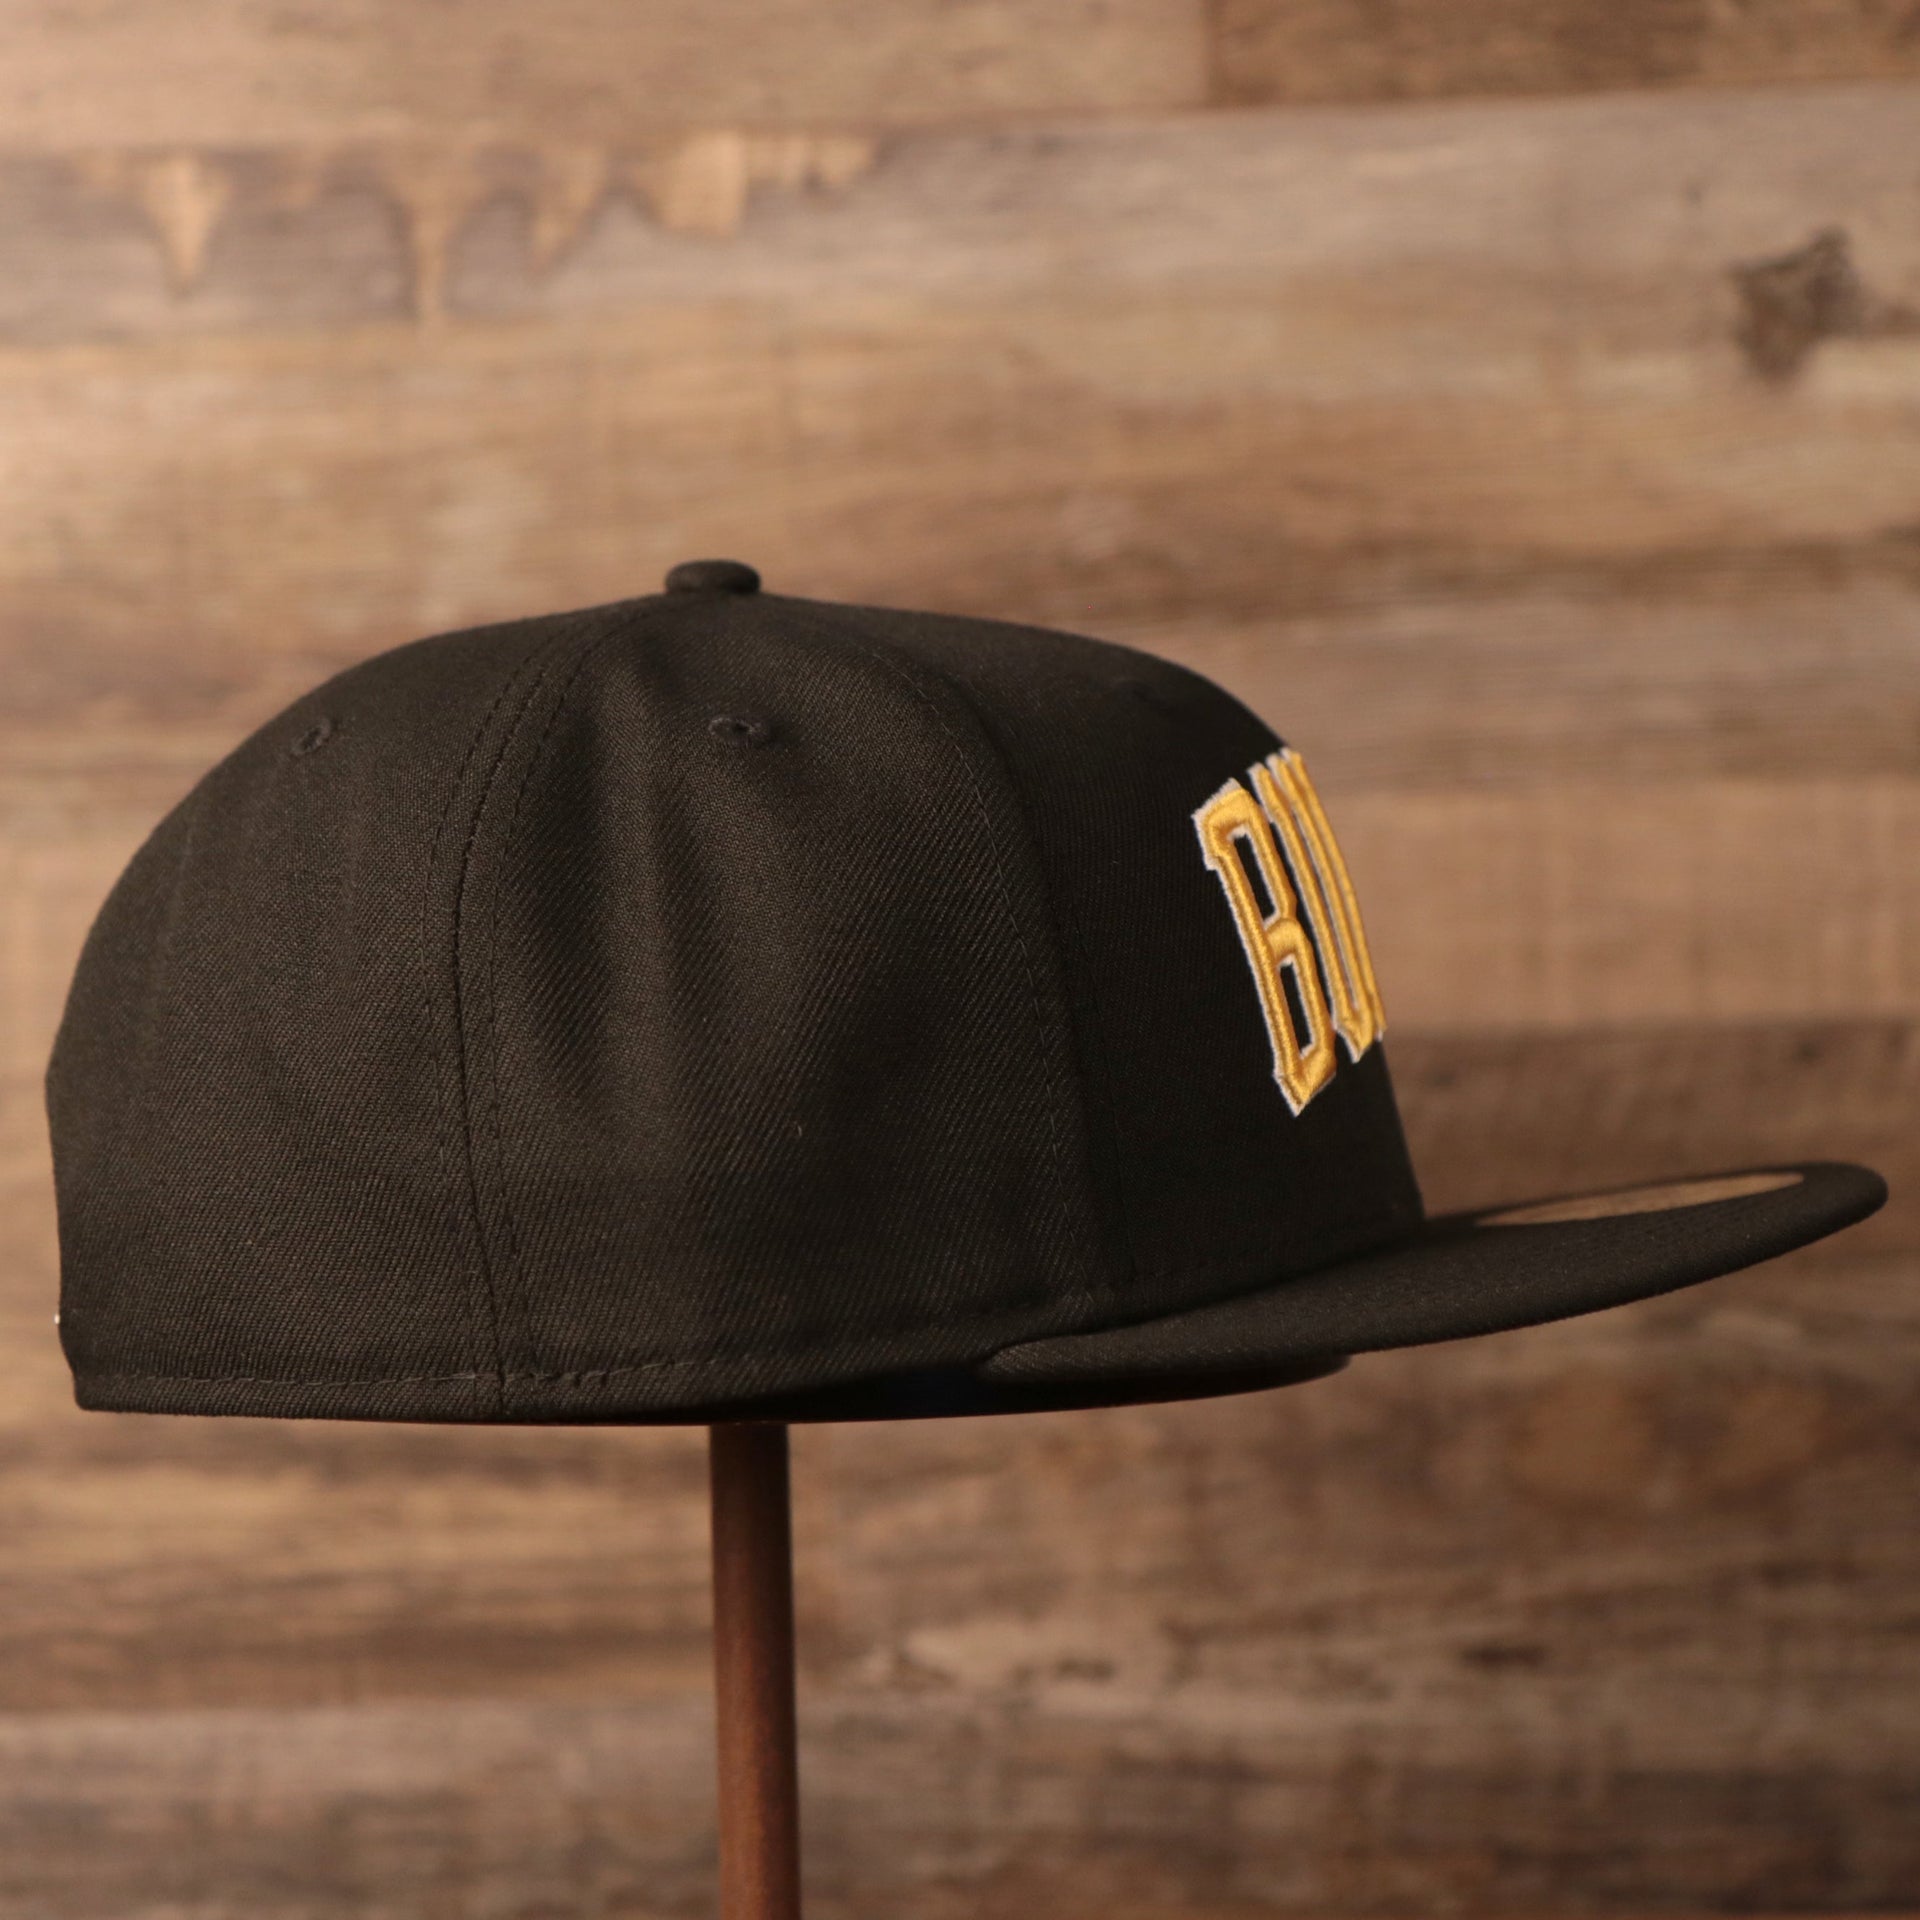 The wearer's right side of The Burgh's black all over embroidered New Era 59fifty.